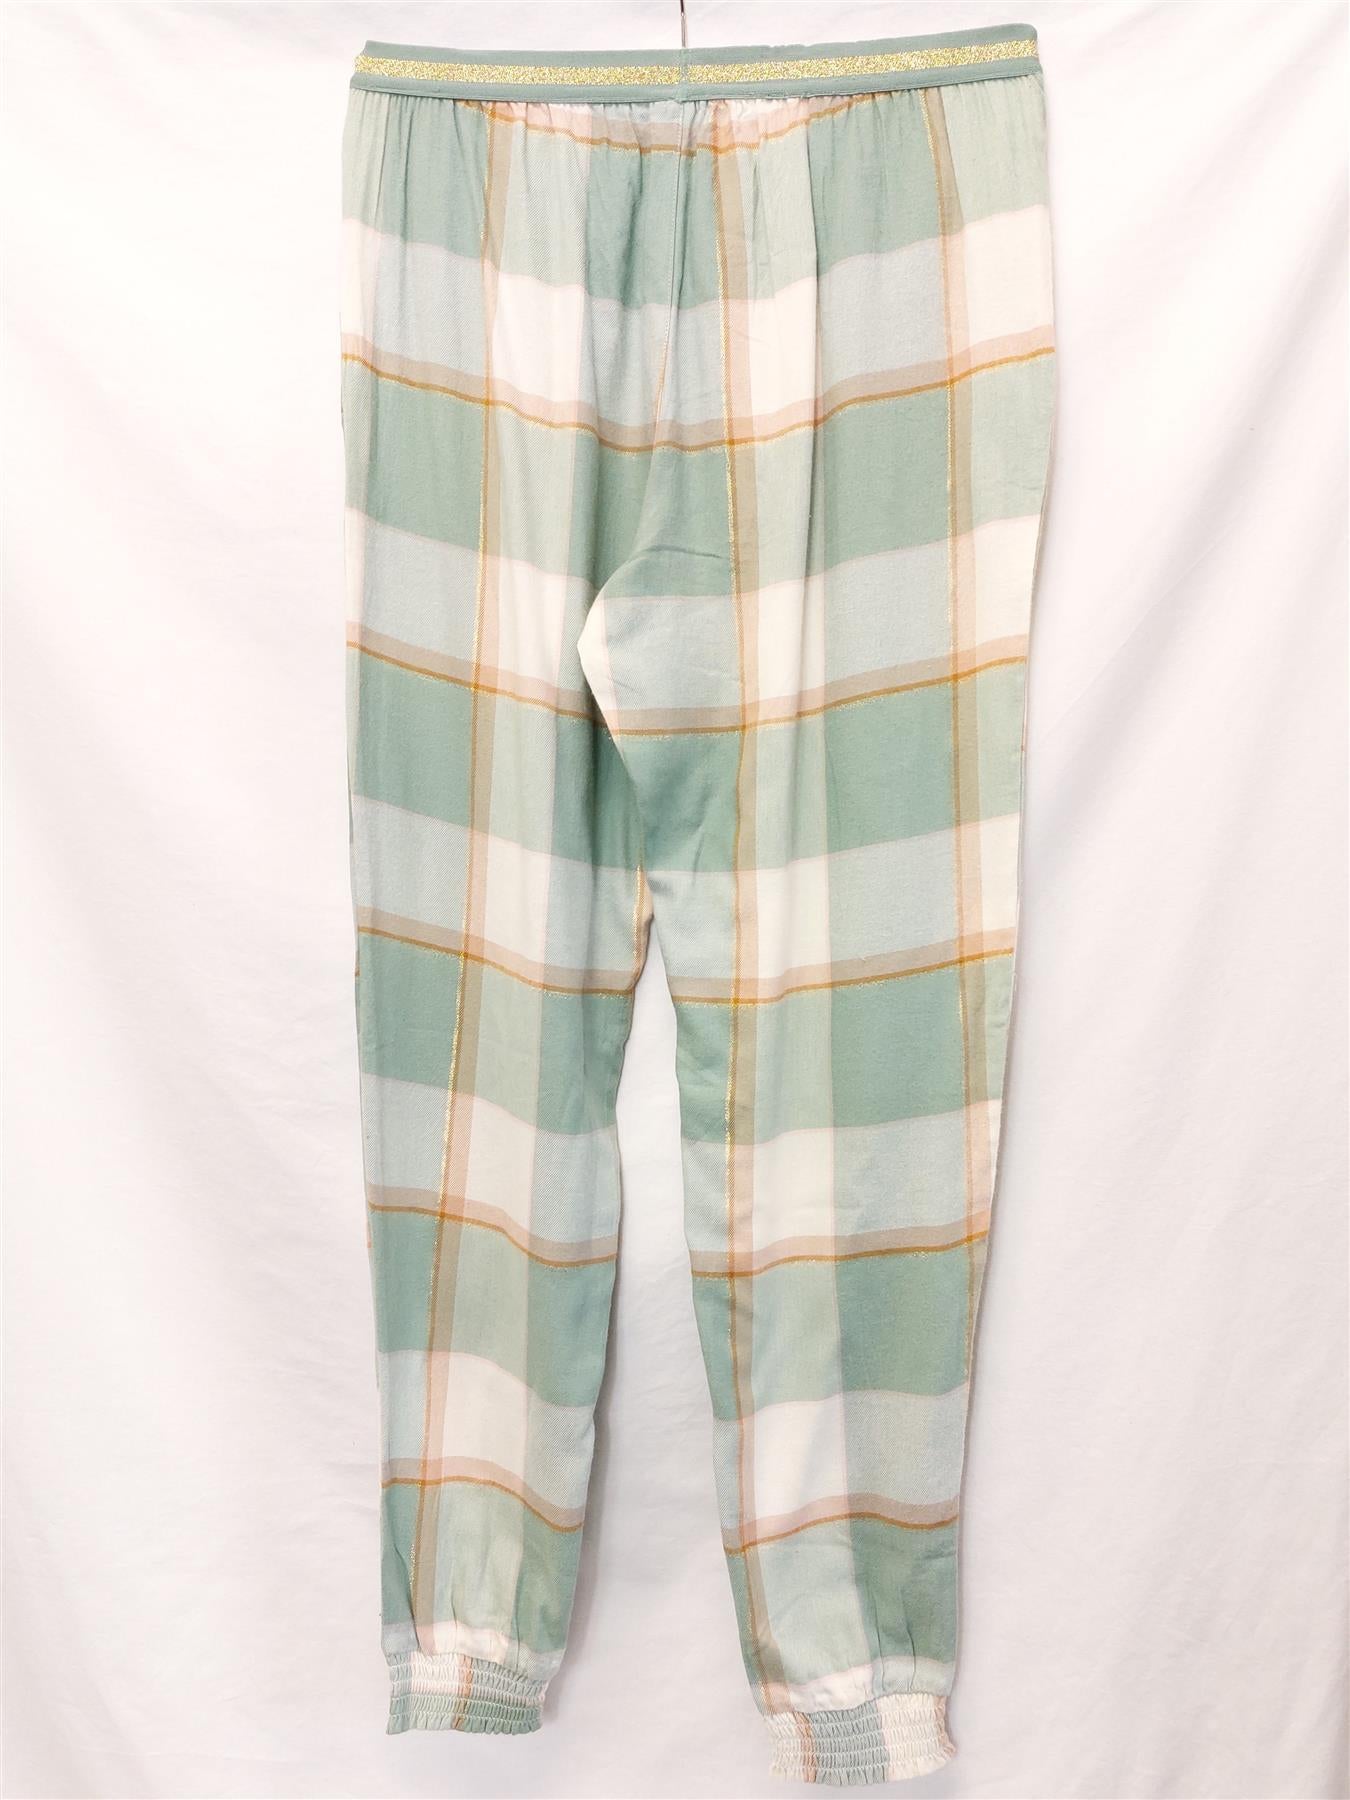 Women's Pyjama Bottoms Soft Comfy Relaxed Fit Sparkly Gold Green Check PJ Pants